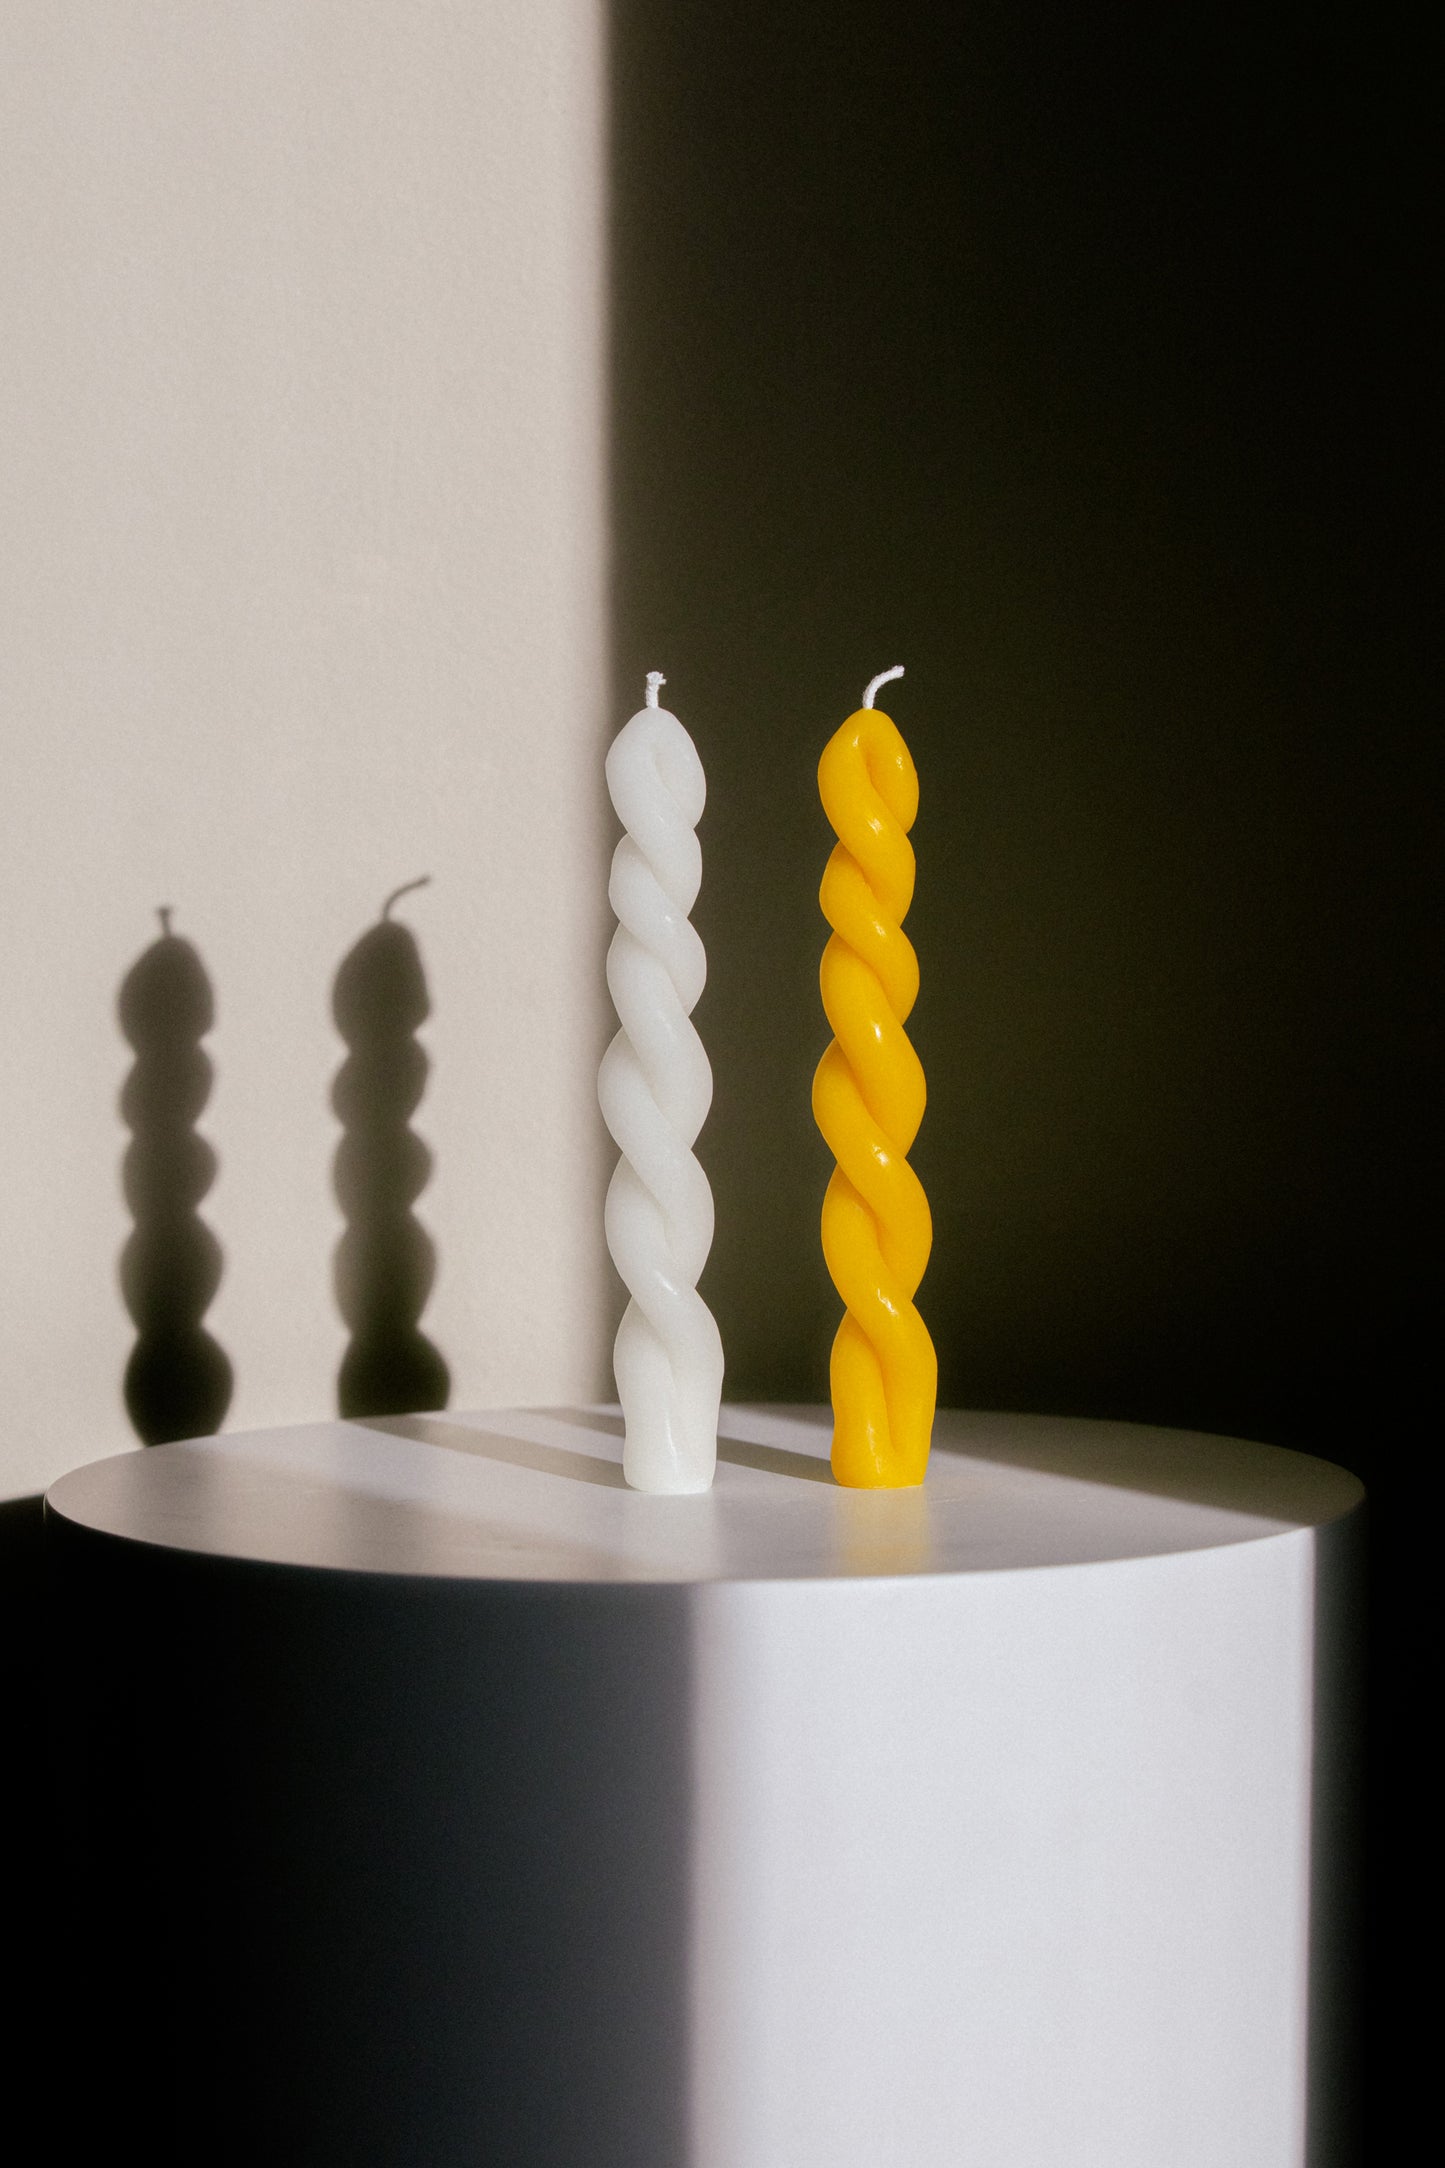 Two Slim Handmade Twisted Sculptural Candles Made from Yellow and White Beeswax